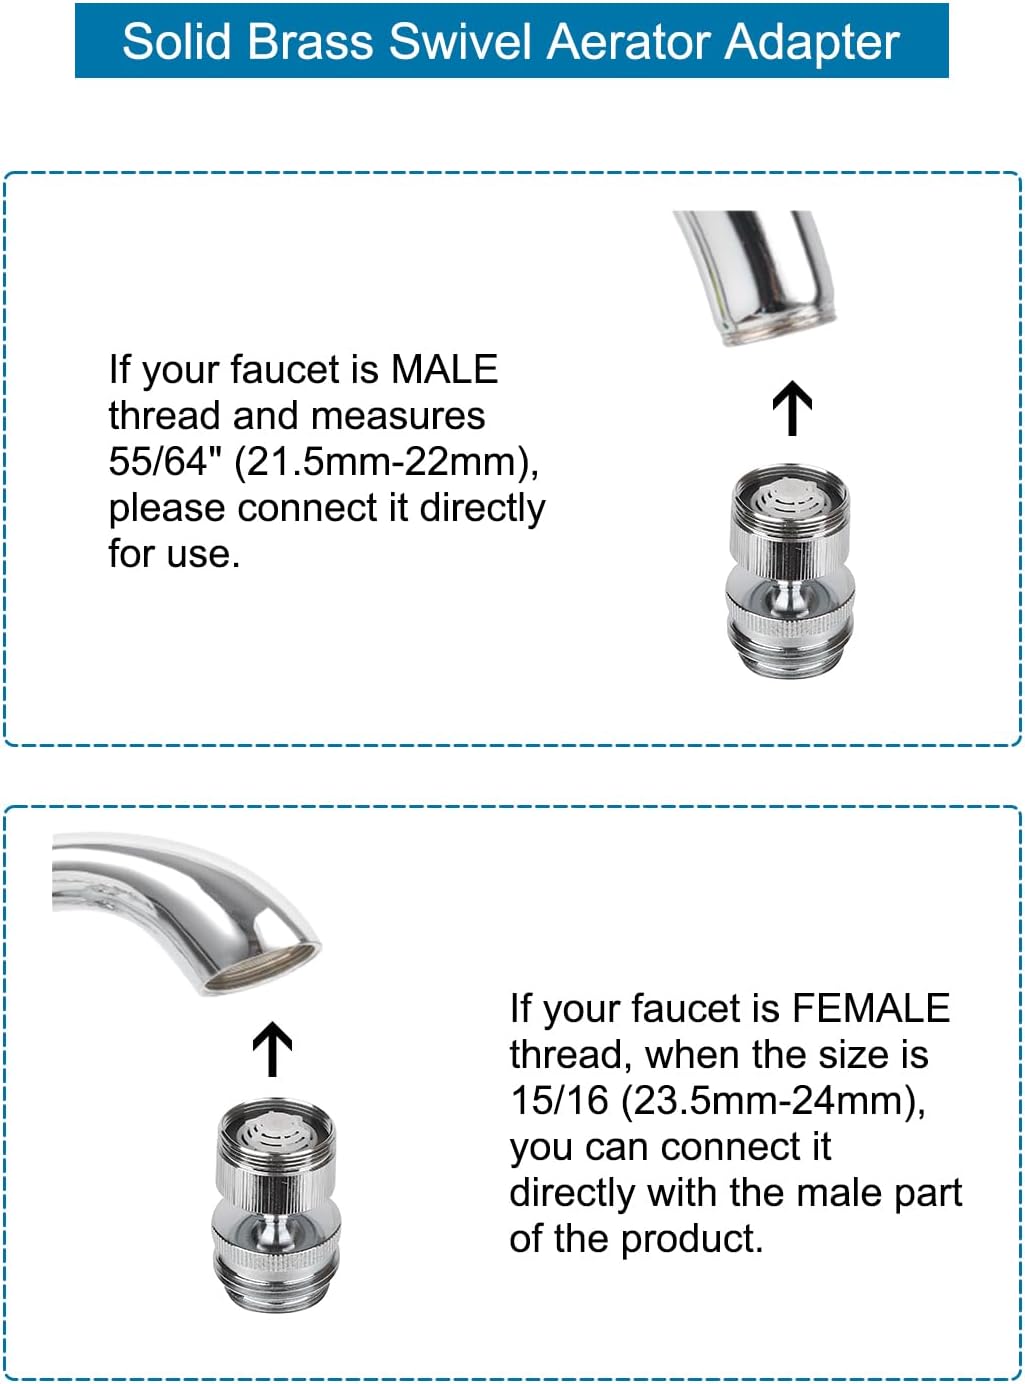 Hibbent Faucet Accessories Hibbent Faucet Adapter Kit, Swivel Aerator Adapter to Connect Garden Hose - Multi-Thread Kitchen Sink Faucet Adapter, 3/4 Inch Garden Hose Adapter for Male to Male and Female to Male - Chrome Finished